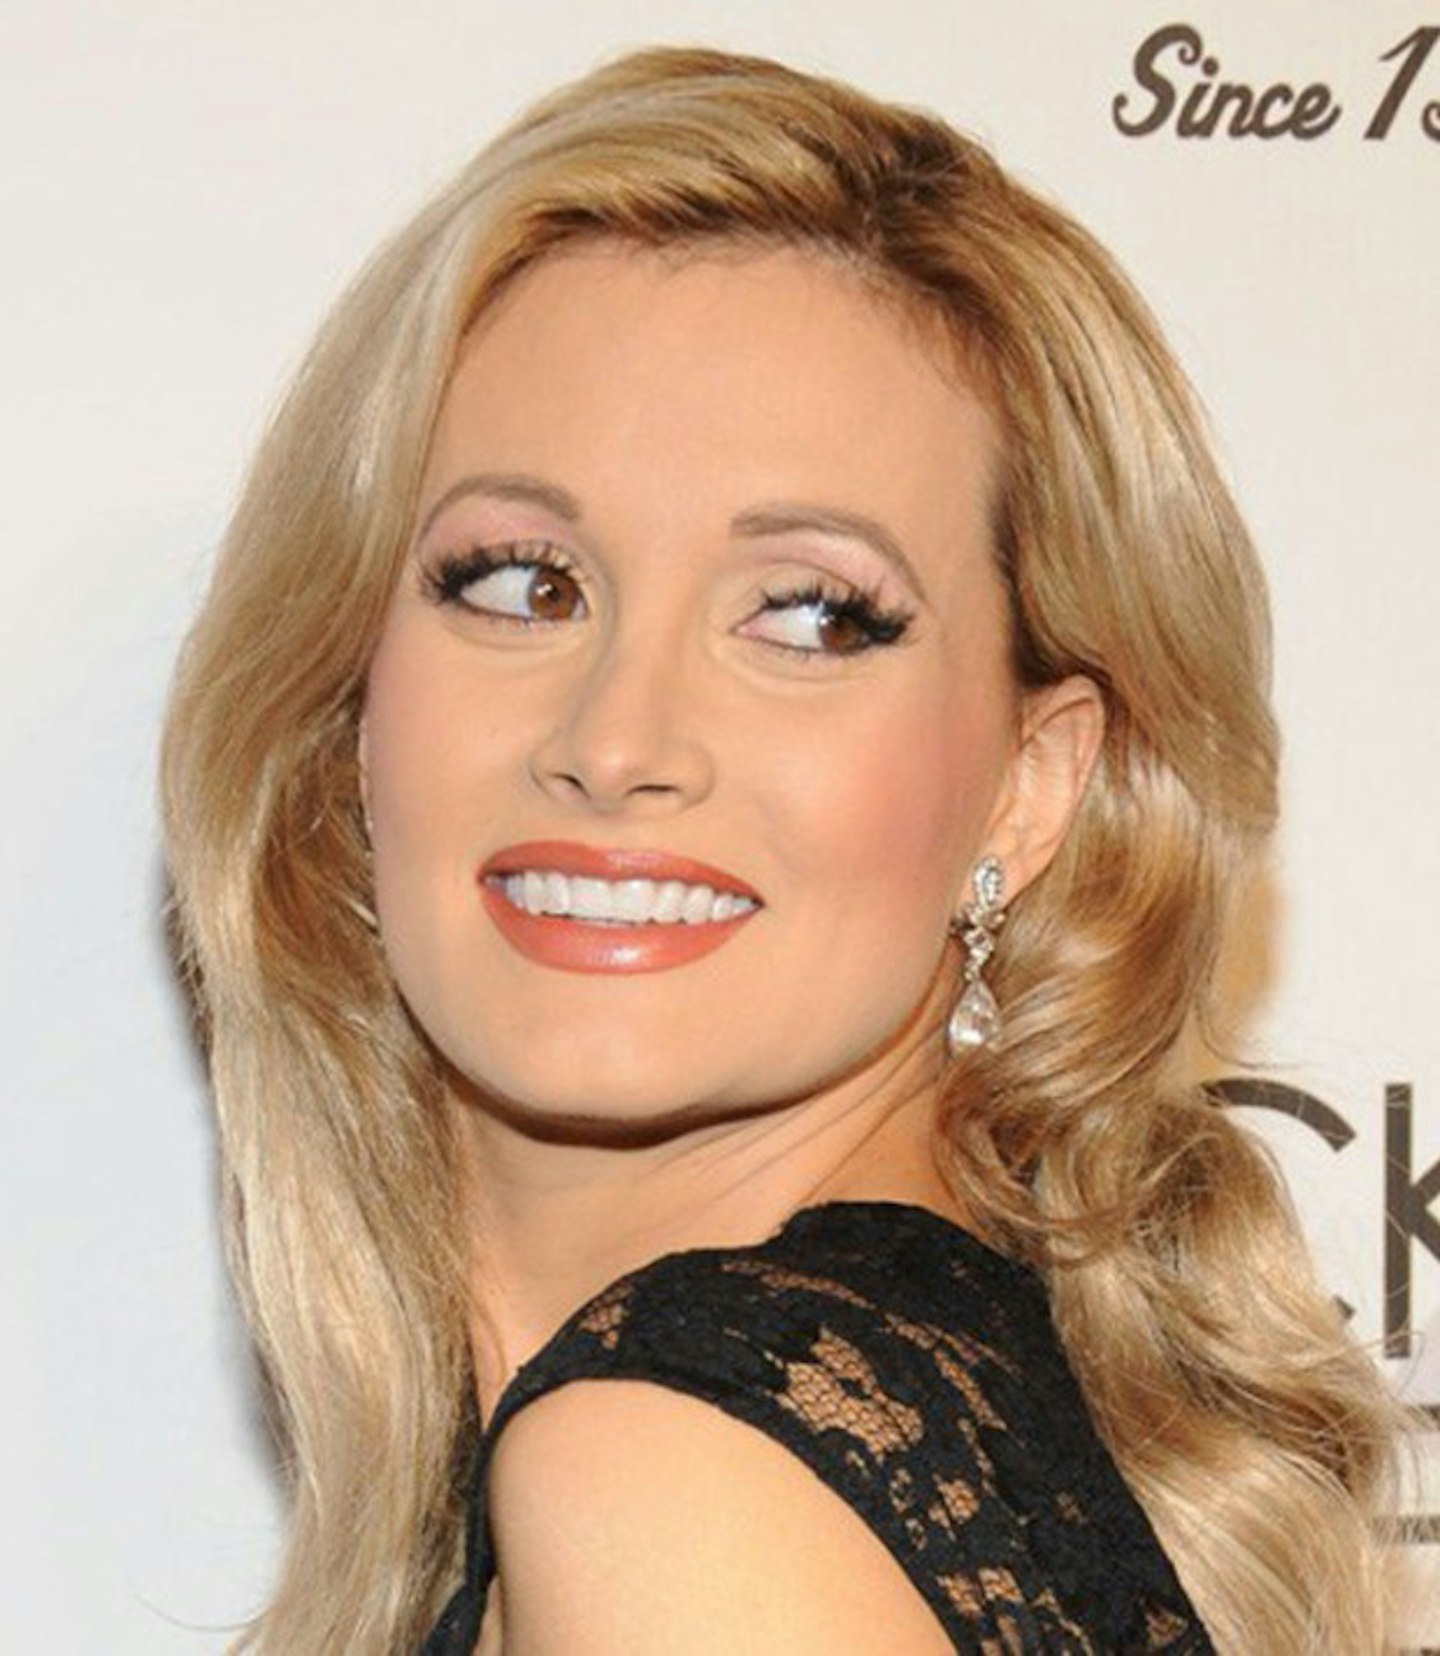 March 2013: Holly Madison welcomed daughter Rainbow